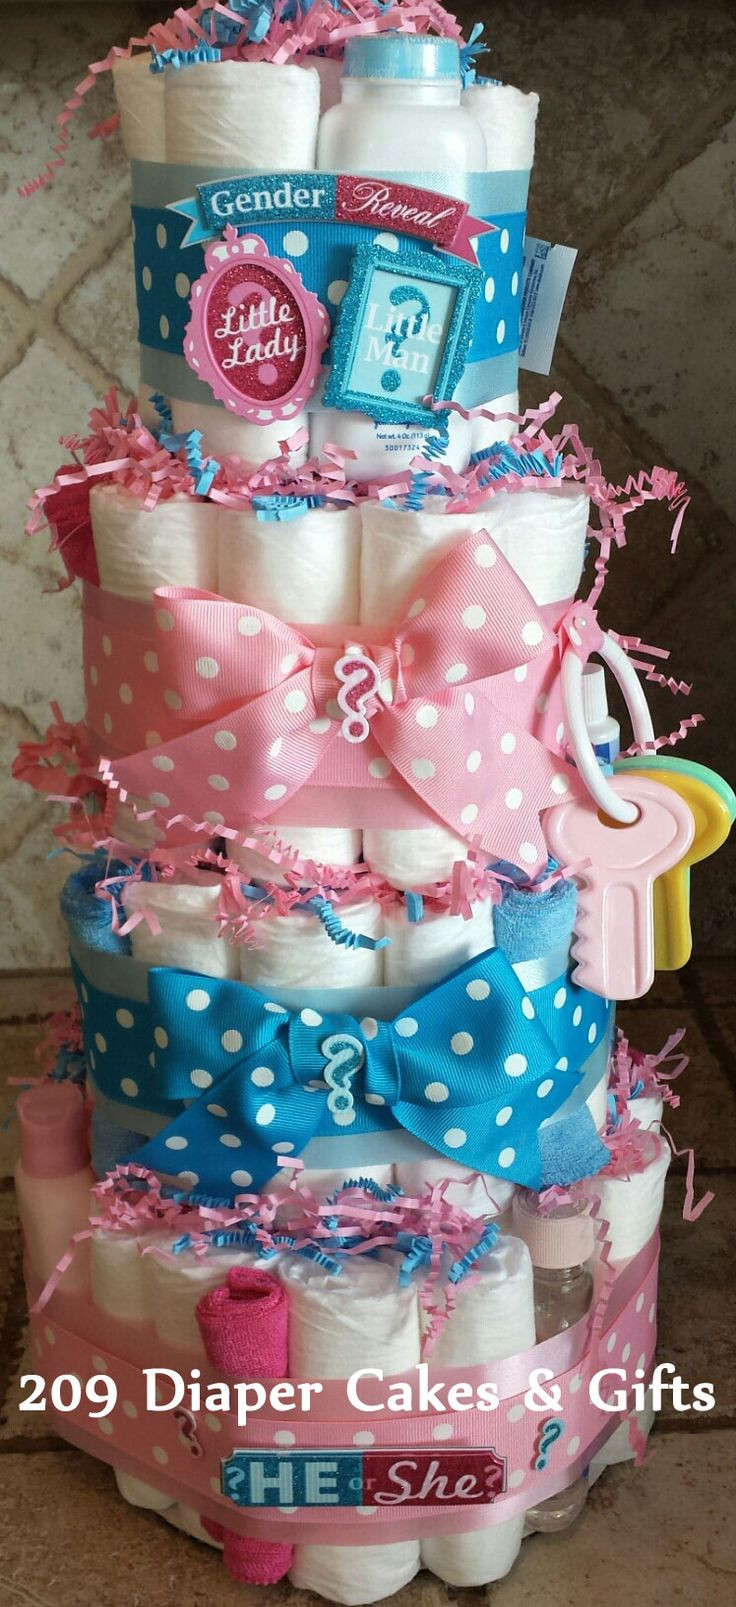 Baby Gender Reveal Party Gifts
 4 Tier Pink & Blue Gender Reveal Diaper Cake by 209 Diaper